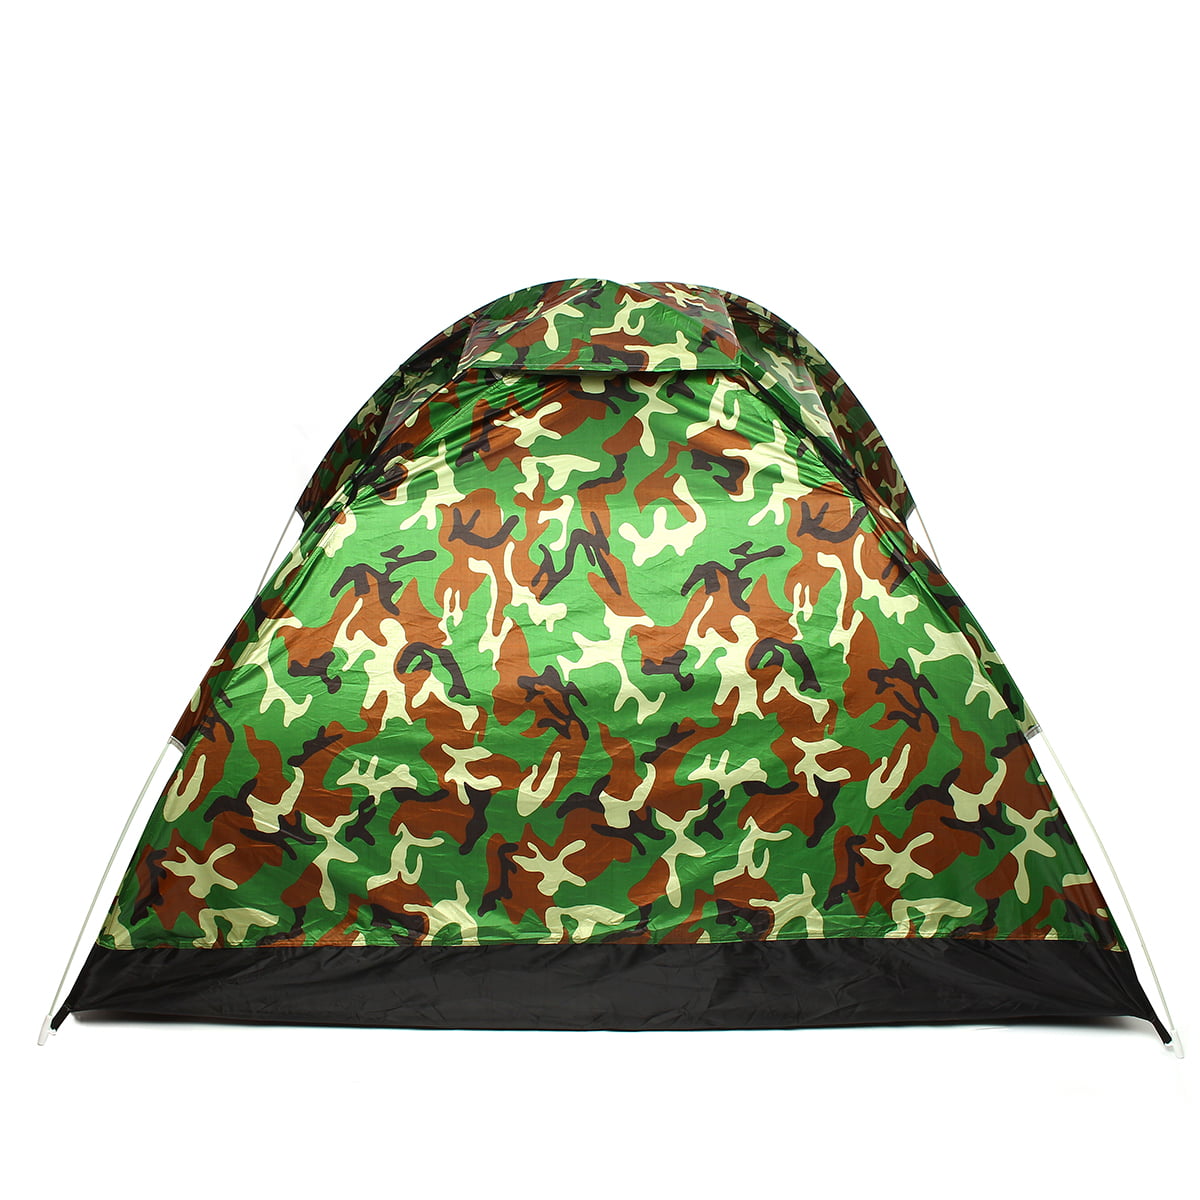 US 2-4 Person Outdoor Camouflage Camping Tent Auto Folding Waterproof Hiking  ψ 